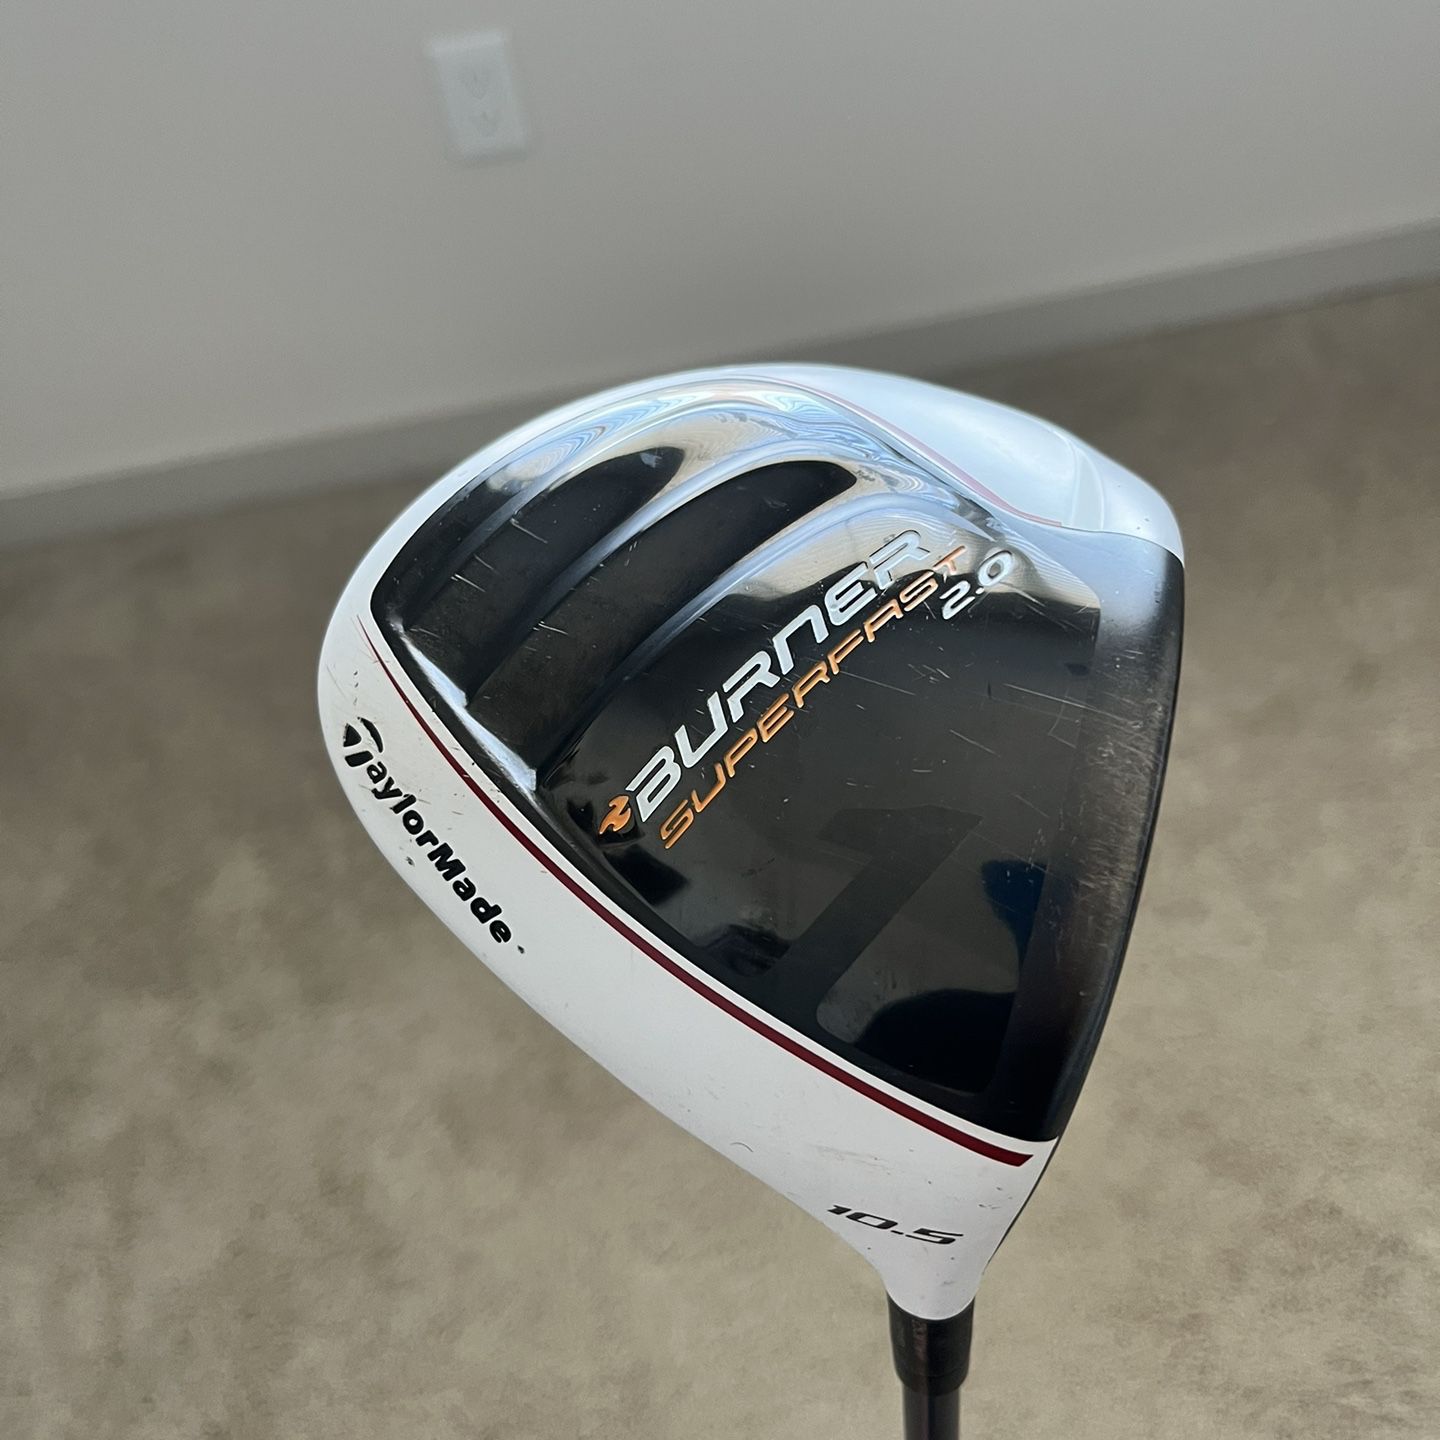 Taylormade Burner Superfast 2.0 Driver for Sale in Miromar Lakes